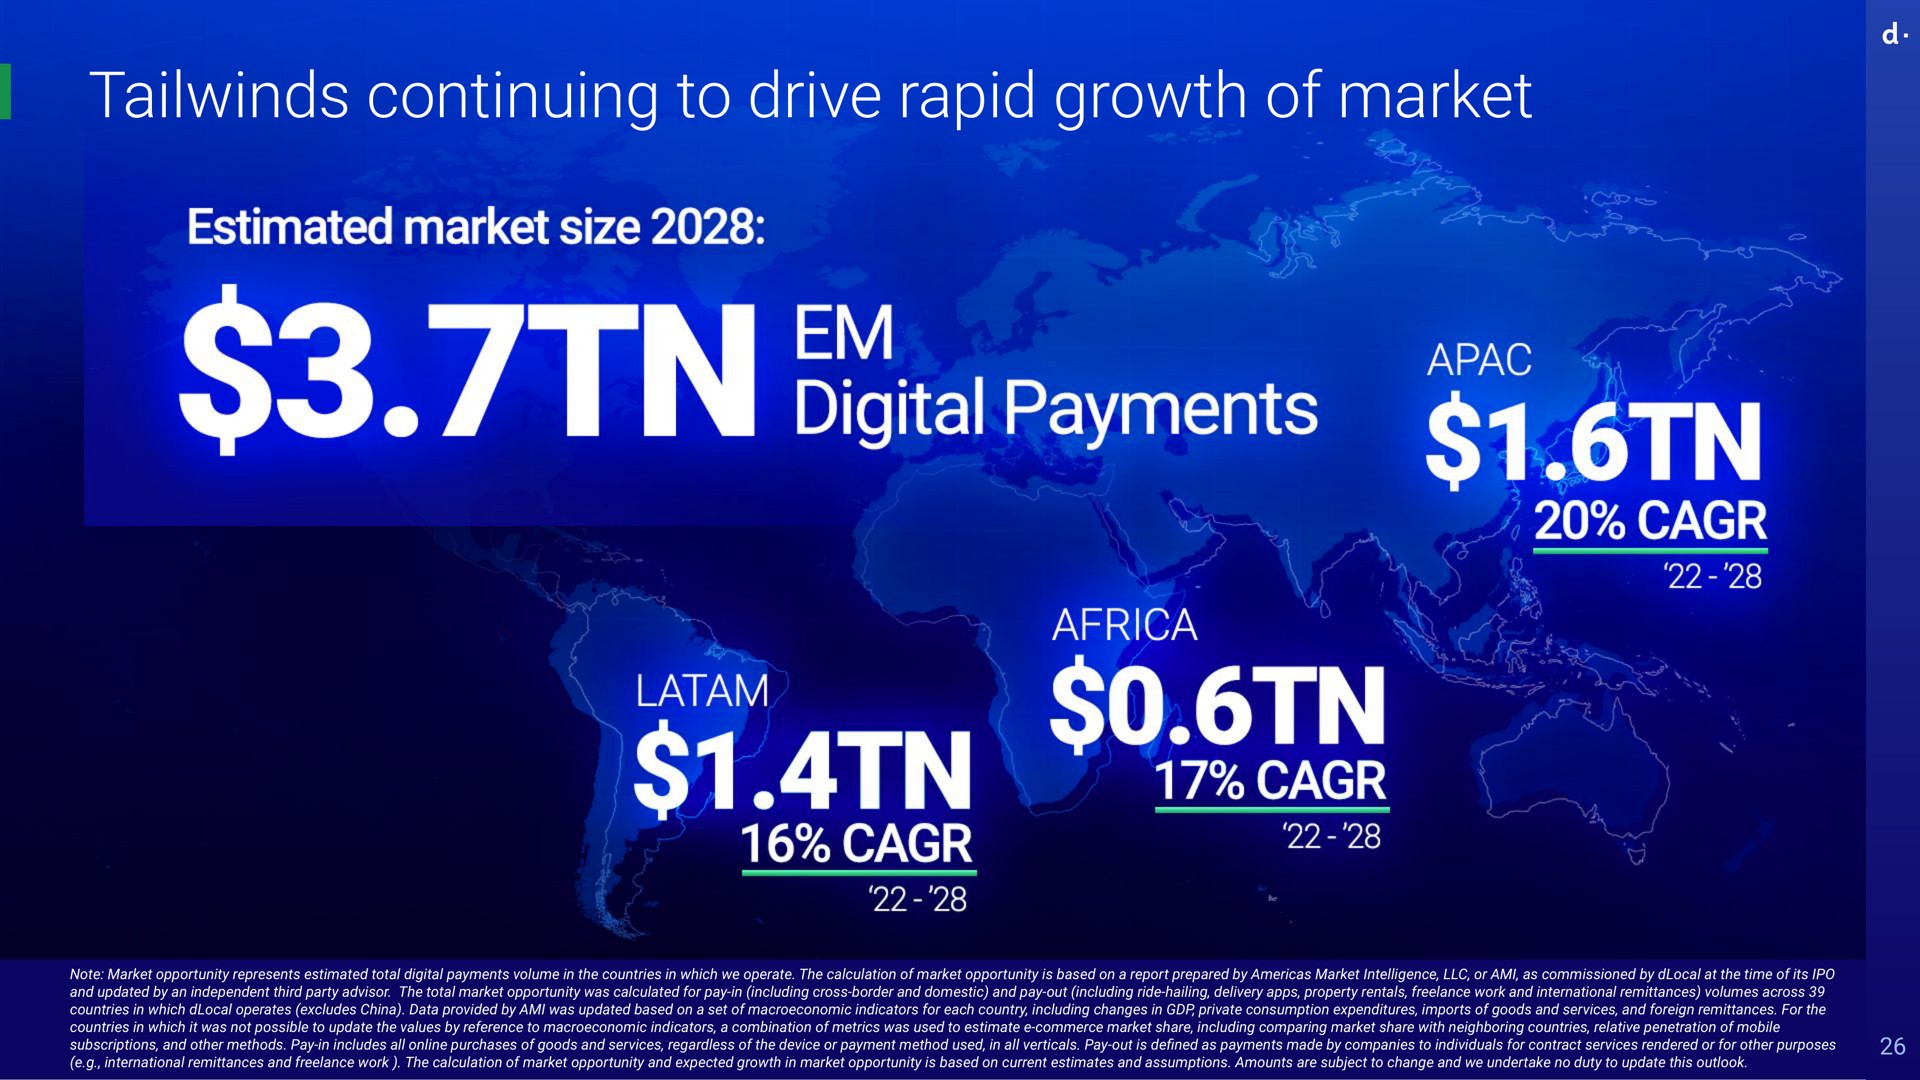 continuing to drive rapid growth of market estimated size i digital payments a note opportunity represents estimated total digital payments volume in the countries in which we operate the calculation opportunity is based on a report prepared by intelligence or ami as commissioned by at the time its and updated by an independent third party advisor the total opportunity was calculated for pay in including cross border and domestic and pay out including ride hailing delivery property rentals work and international remittances volumes across countries in which operates excludes china data provided by ami was updated based on a set indicators for each country including changes in private consumption expenditures imports goods and services and foreign remittances for the countries in which it was not possible update the values by reference indicators a combination metrics was used estimate commerce share including comparing share with neighboring countries relative penetration mobile subscriptions and other methods pay in includes all purchases goods and services regardless the device or payment method used in all verticals pay out is defined as payments made by companies individuals for contract services rendered or for other purposes international remittances and work the calculation opportunity and expected in opportunity is based on current estimates and assumptions amounts are subject change and we undertake no duty update this outlook | dLocal